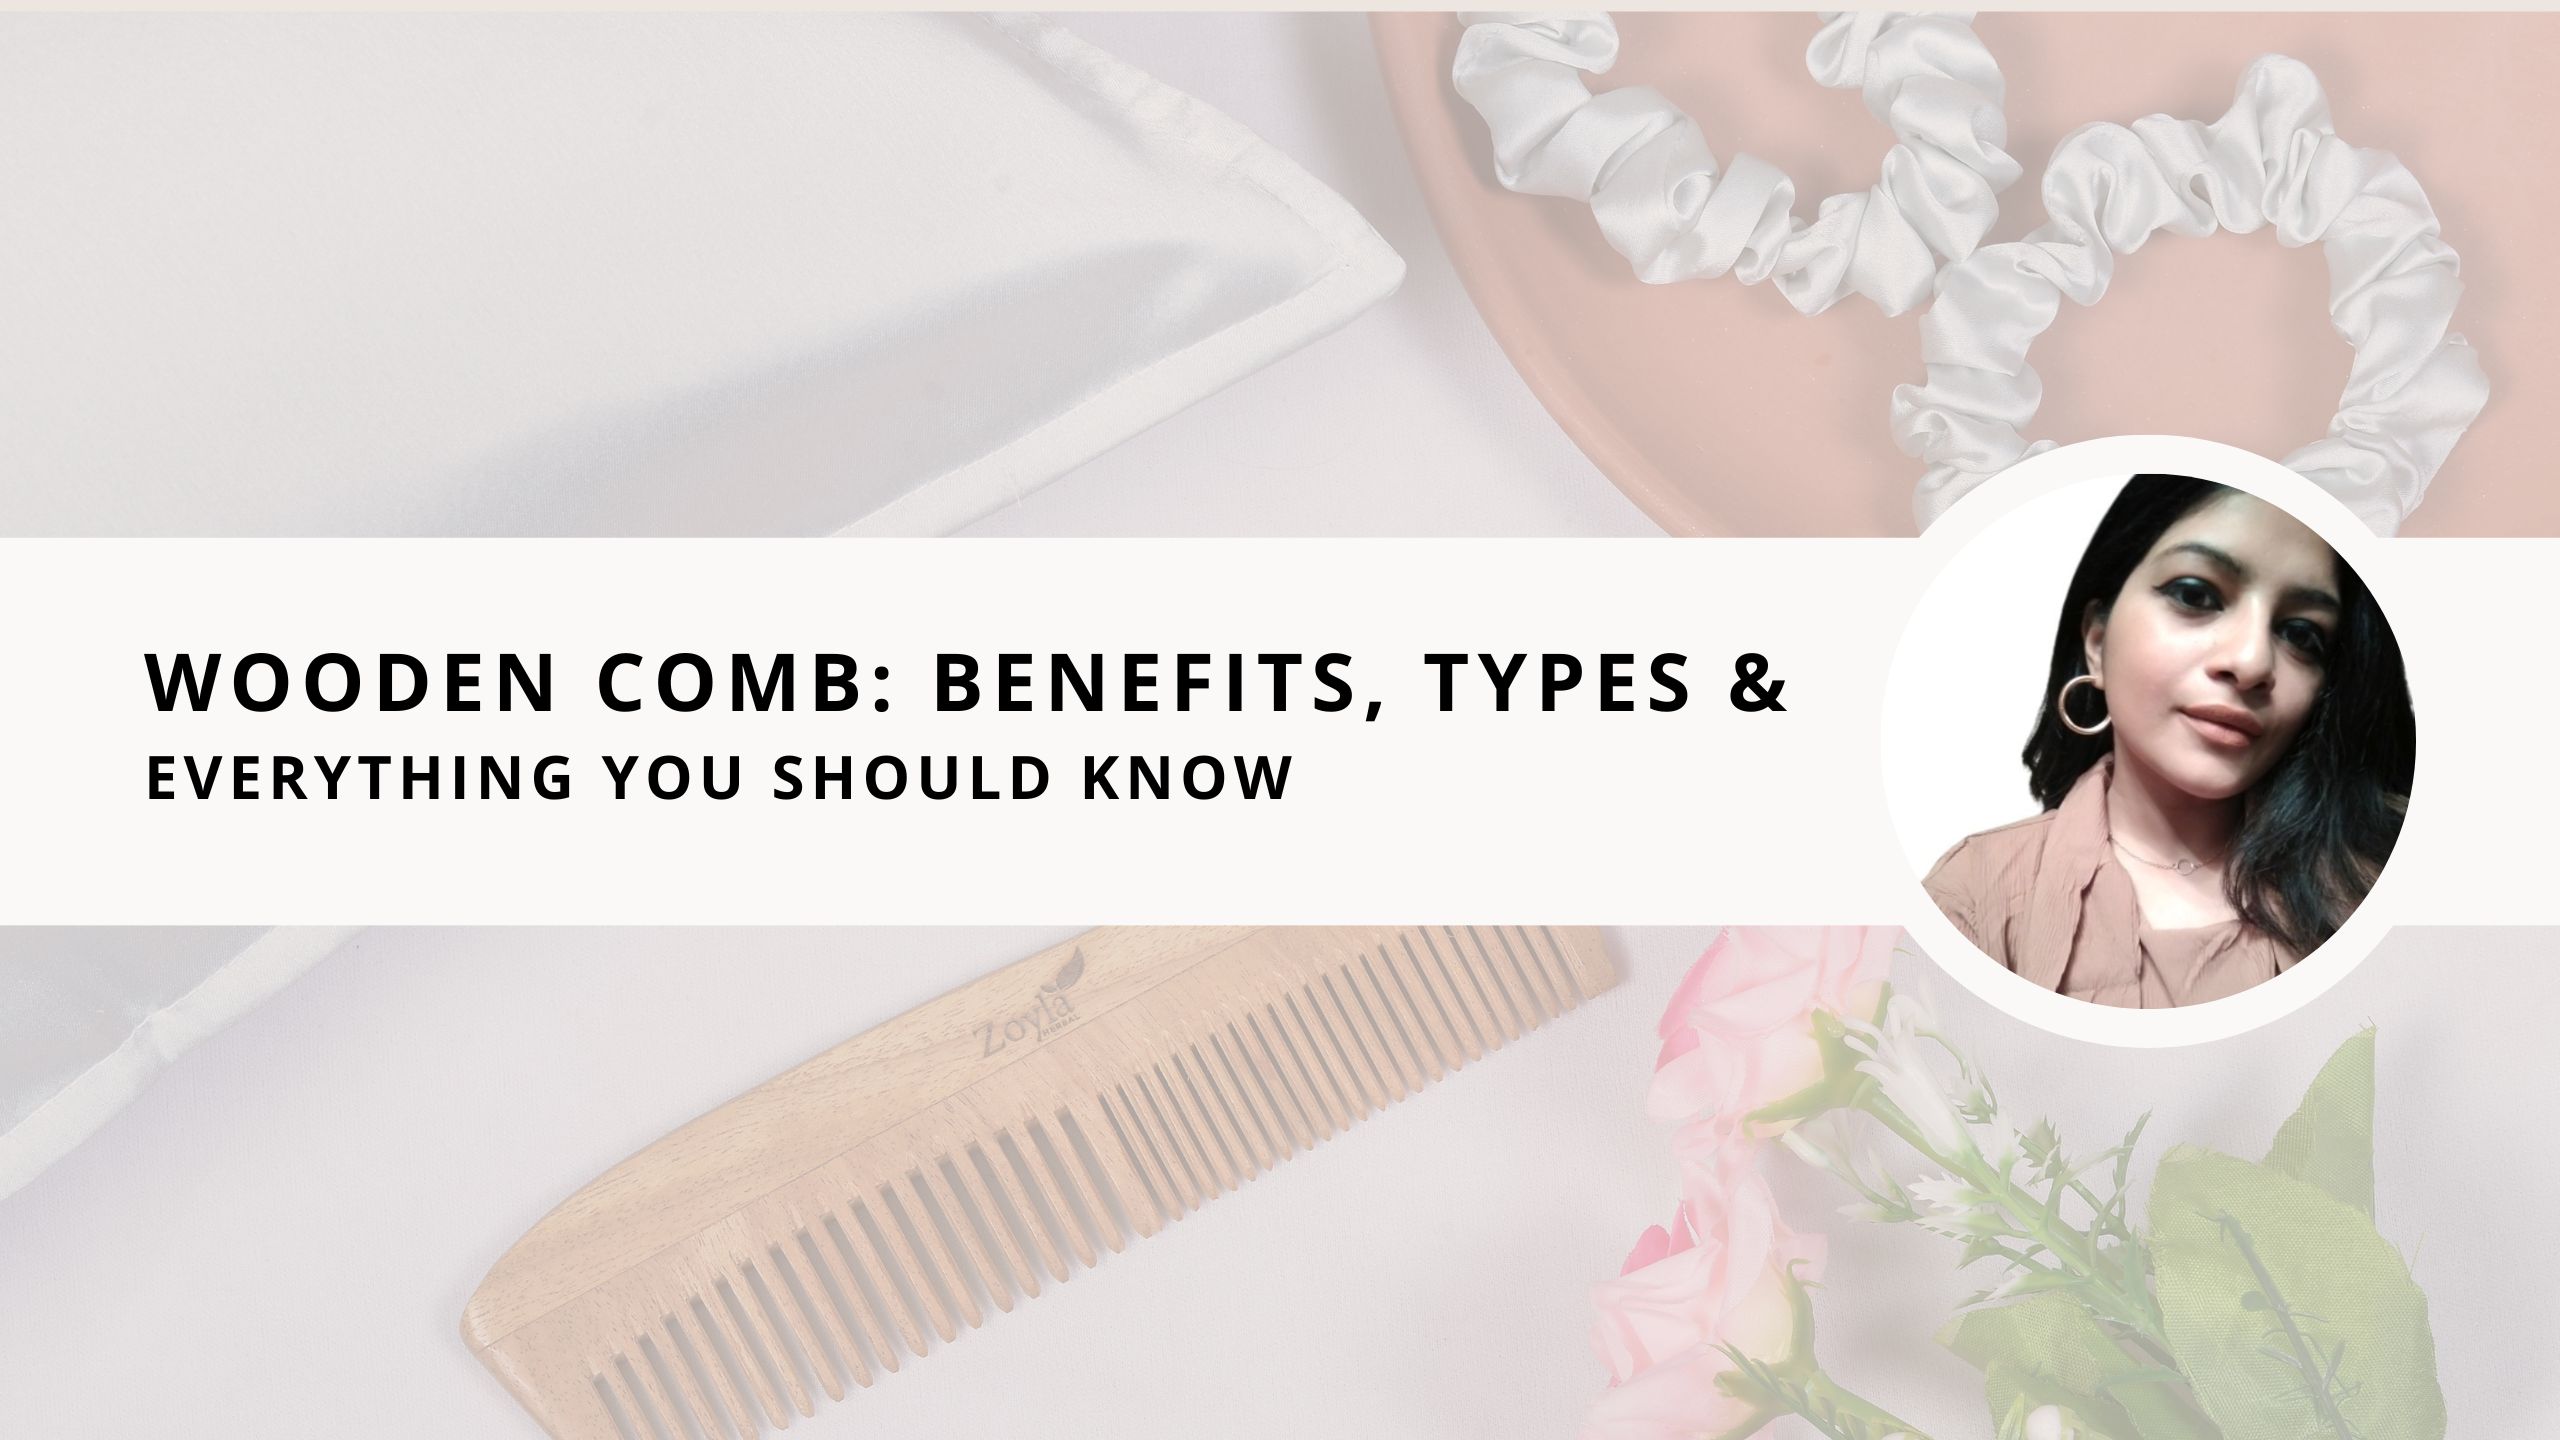 Wooden or plastic? Weigh the benefits of using the right comb for your hair